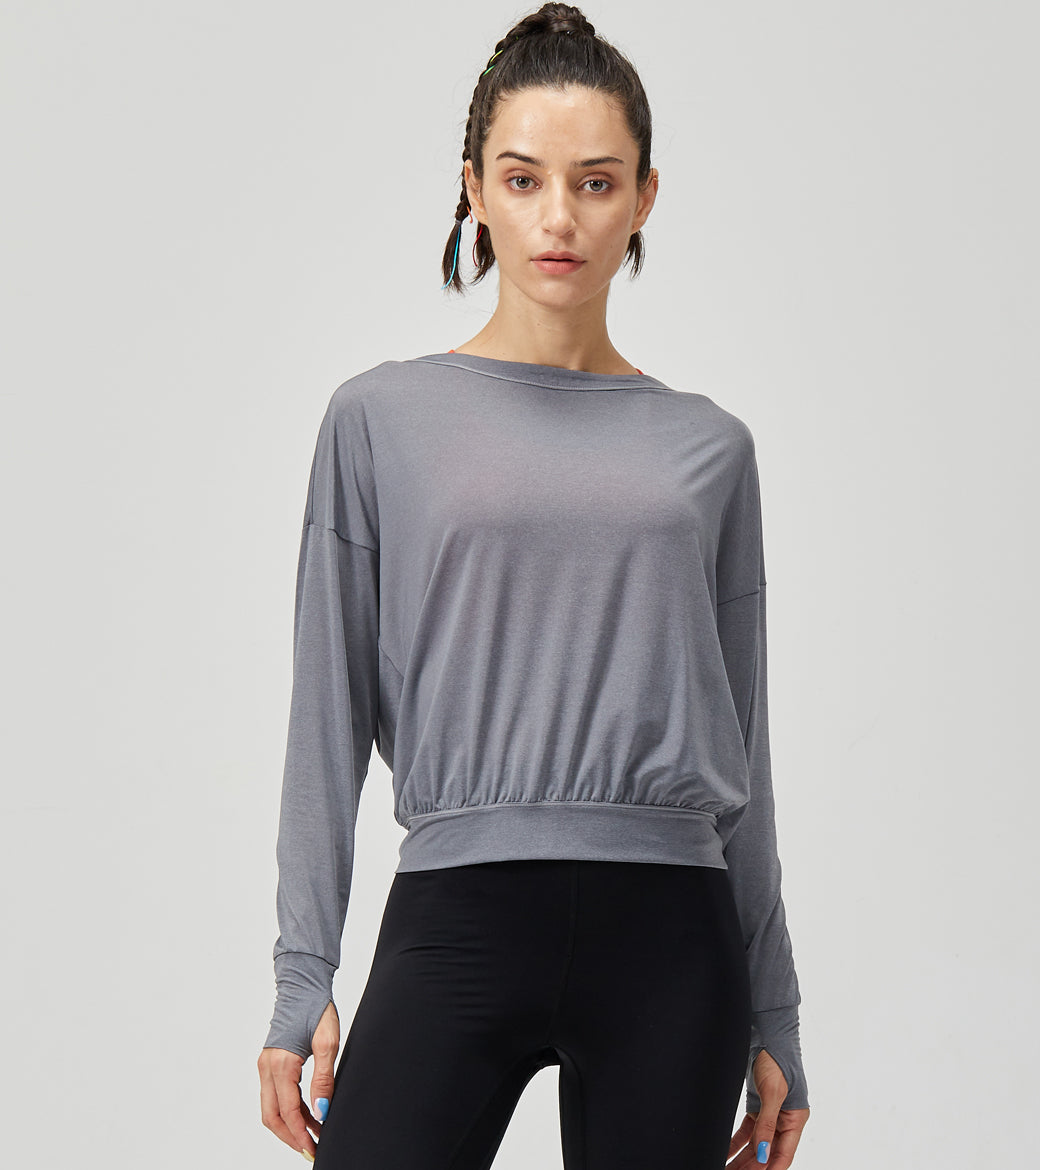 LOVESOFT Womens Grey Hollow Out Casual Long Sleeves